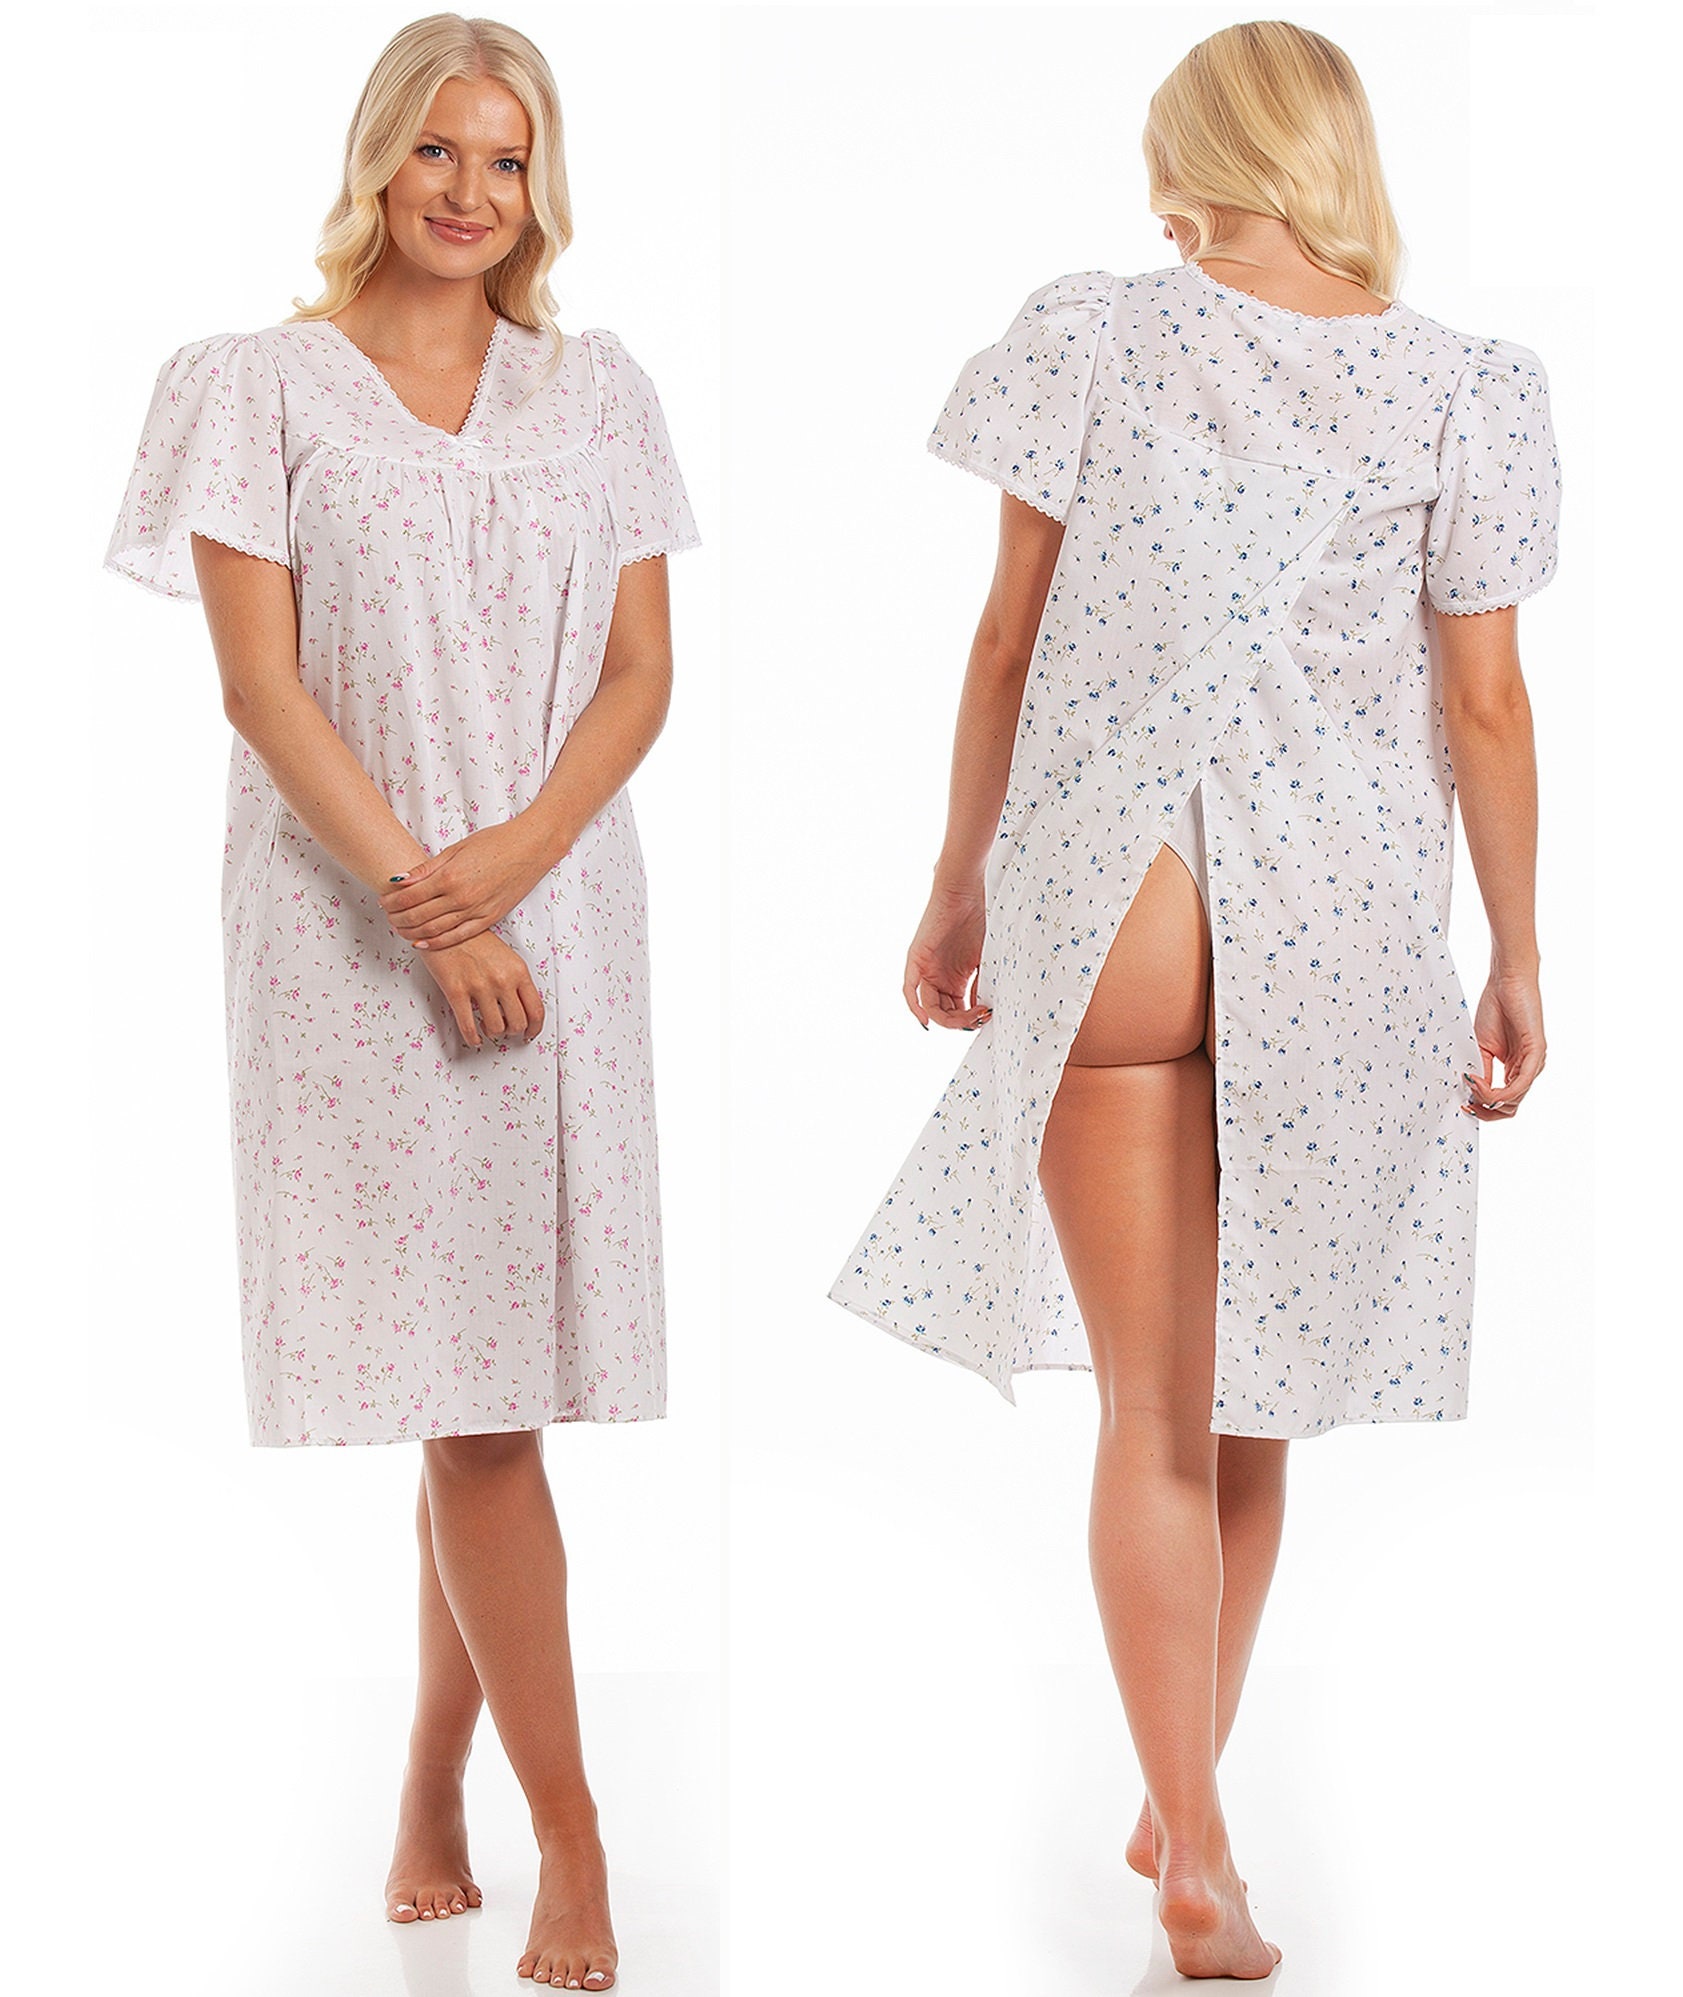 Cotton Blend Reusable Surgical Gown - BH Medwear